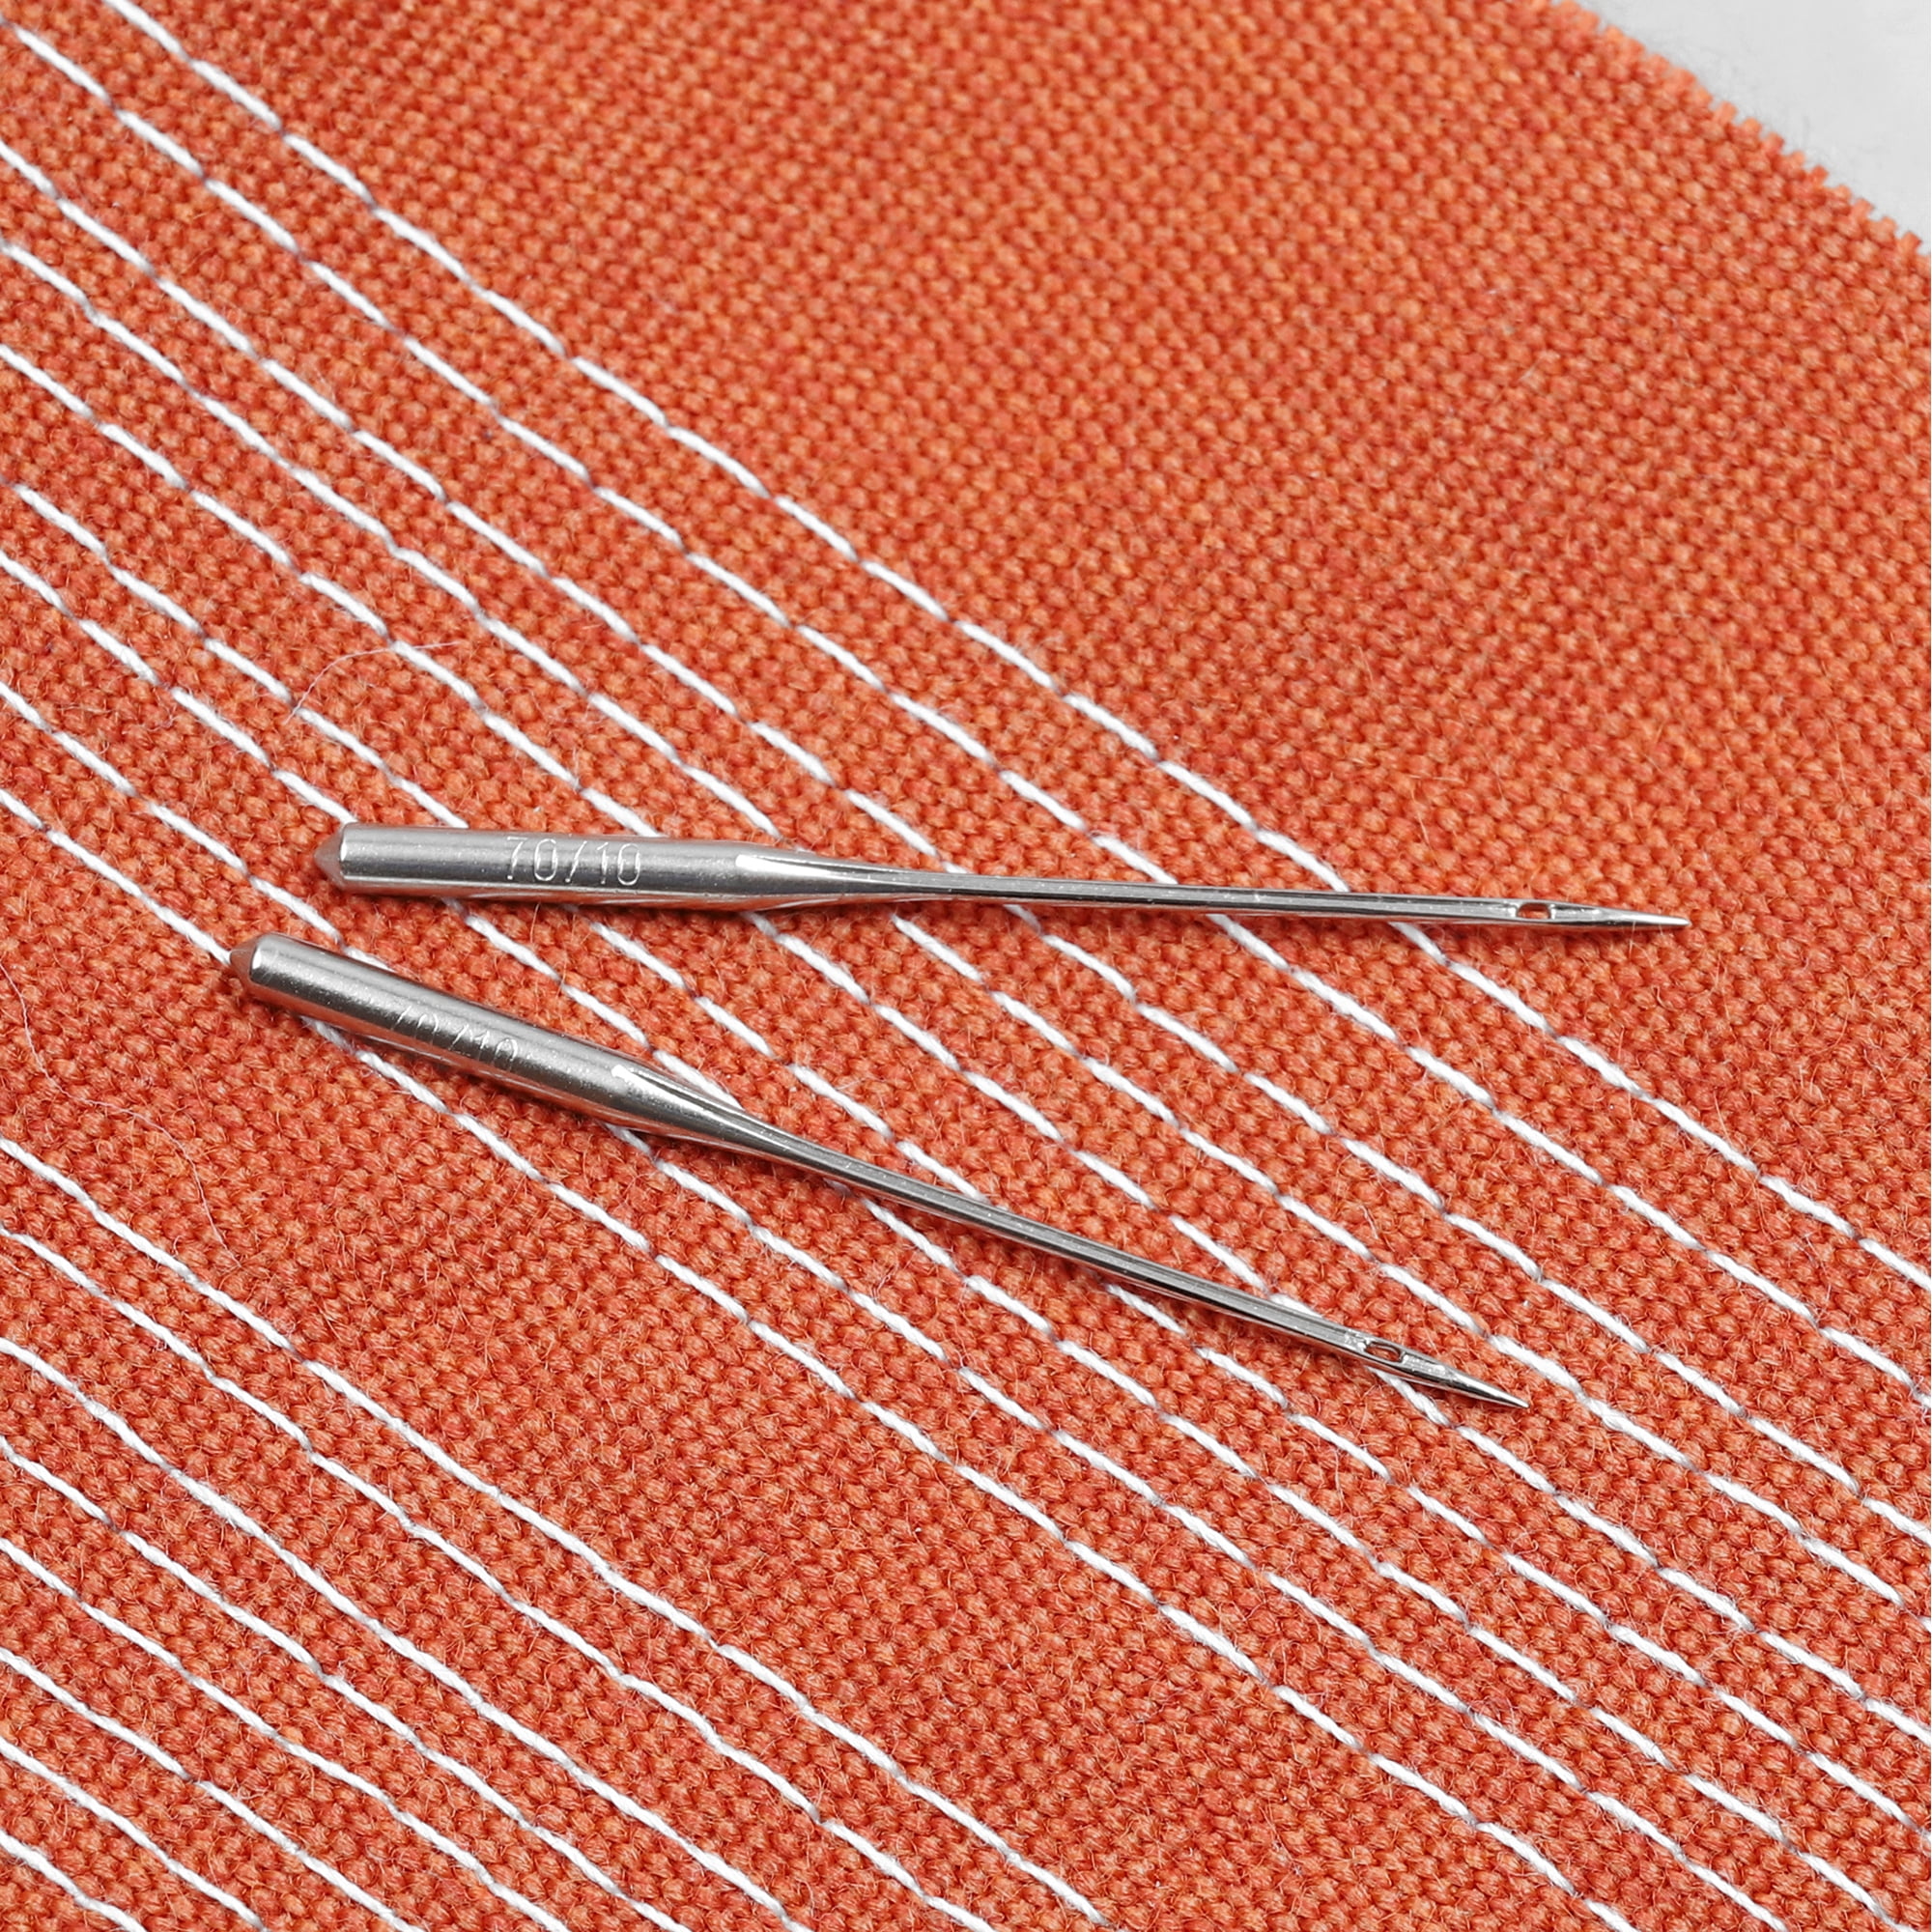 Hello Hobby Embroidery Sewing Machine Needles - 5 ct